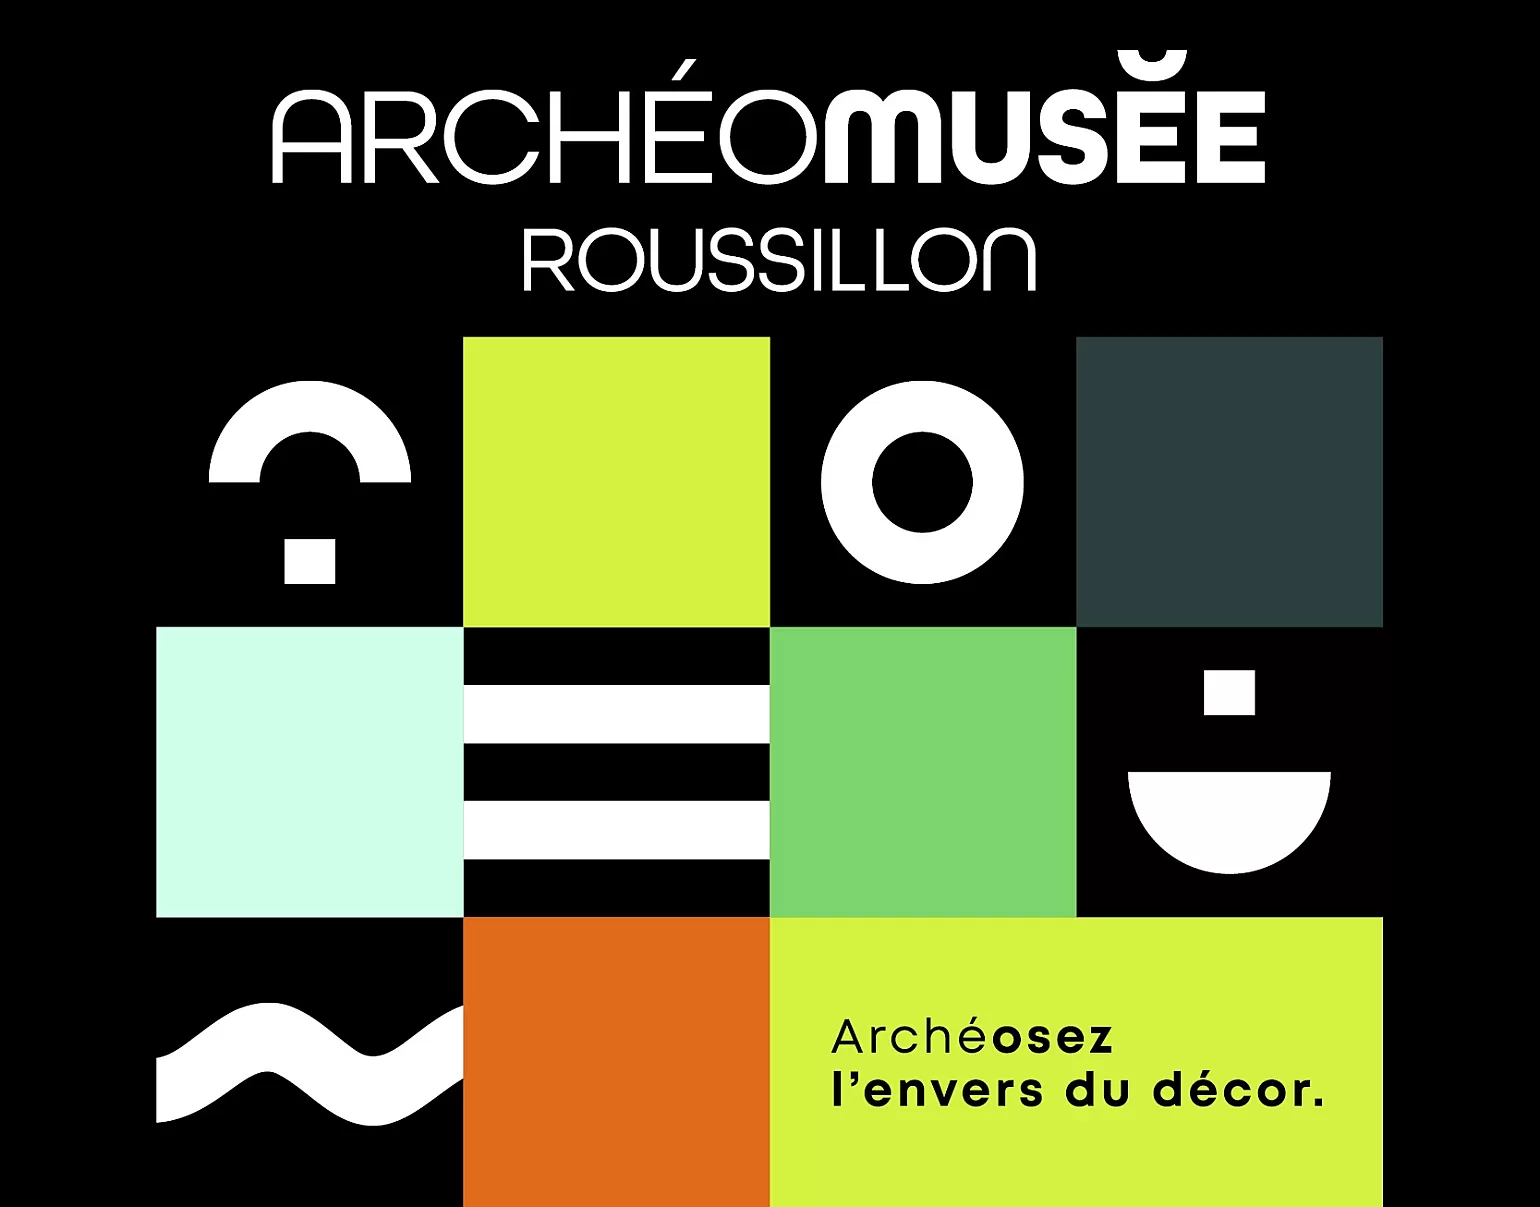 ARCHEOMUSEE Roussillon 800x627 2